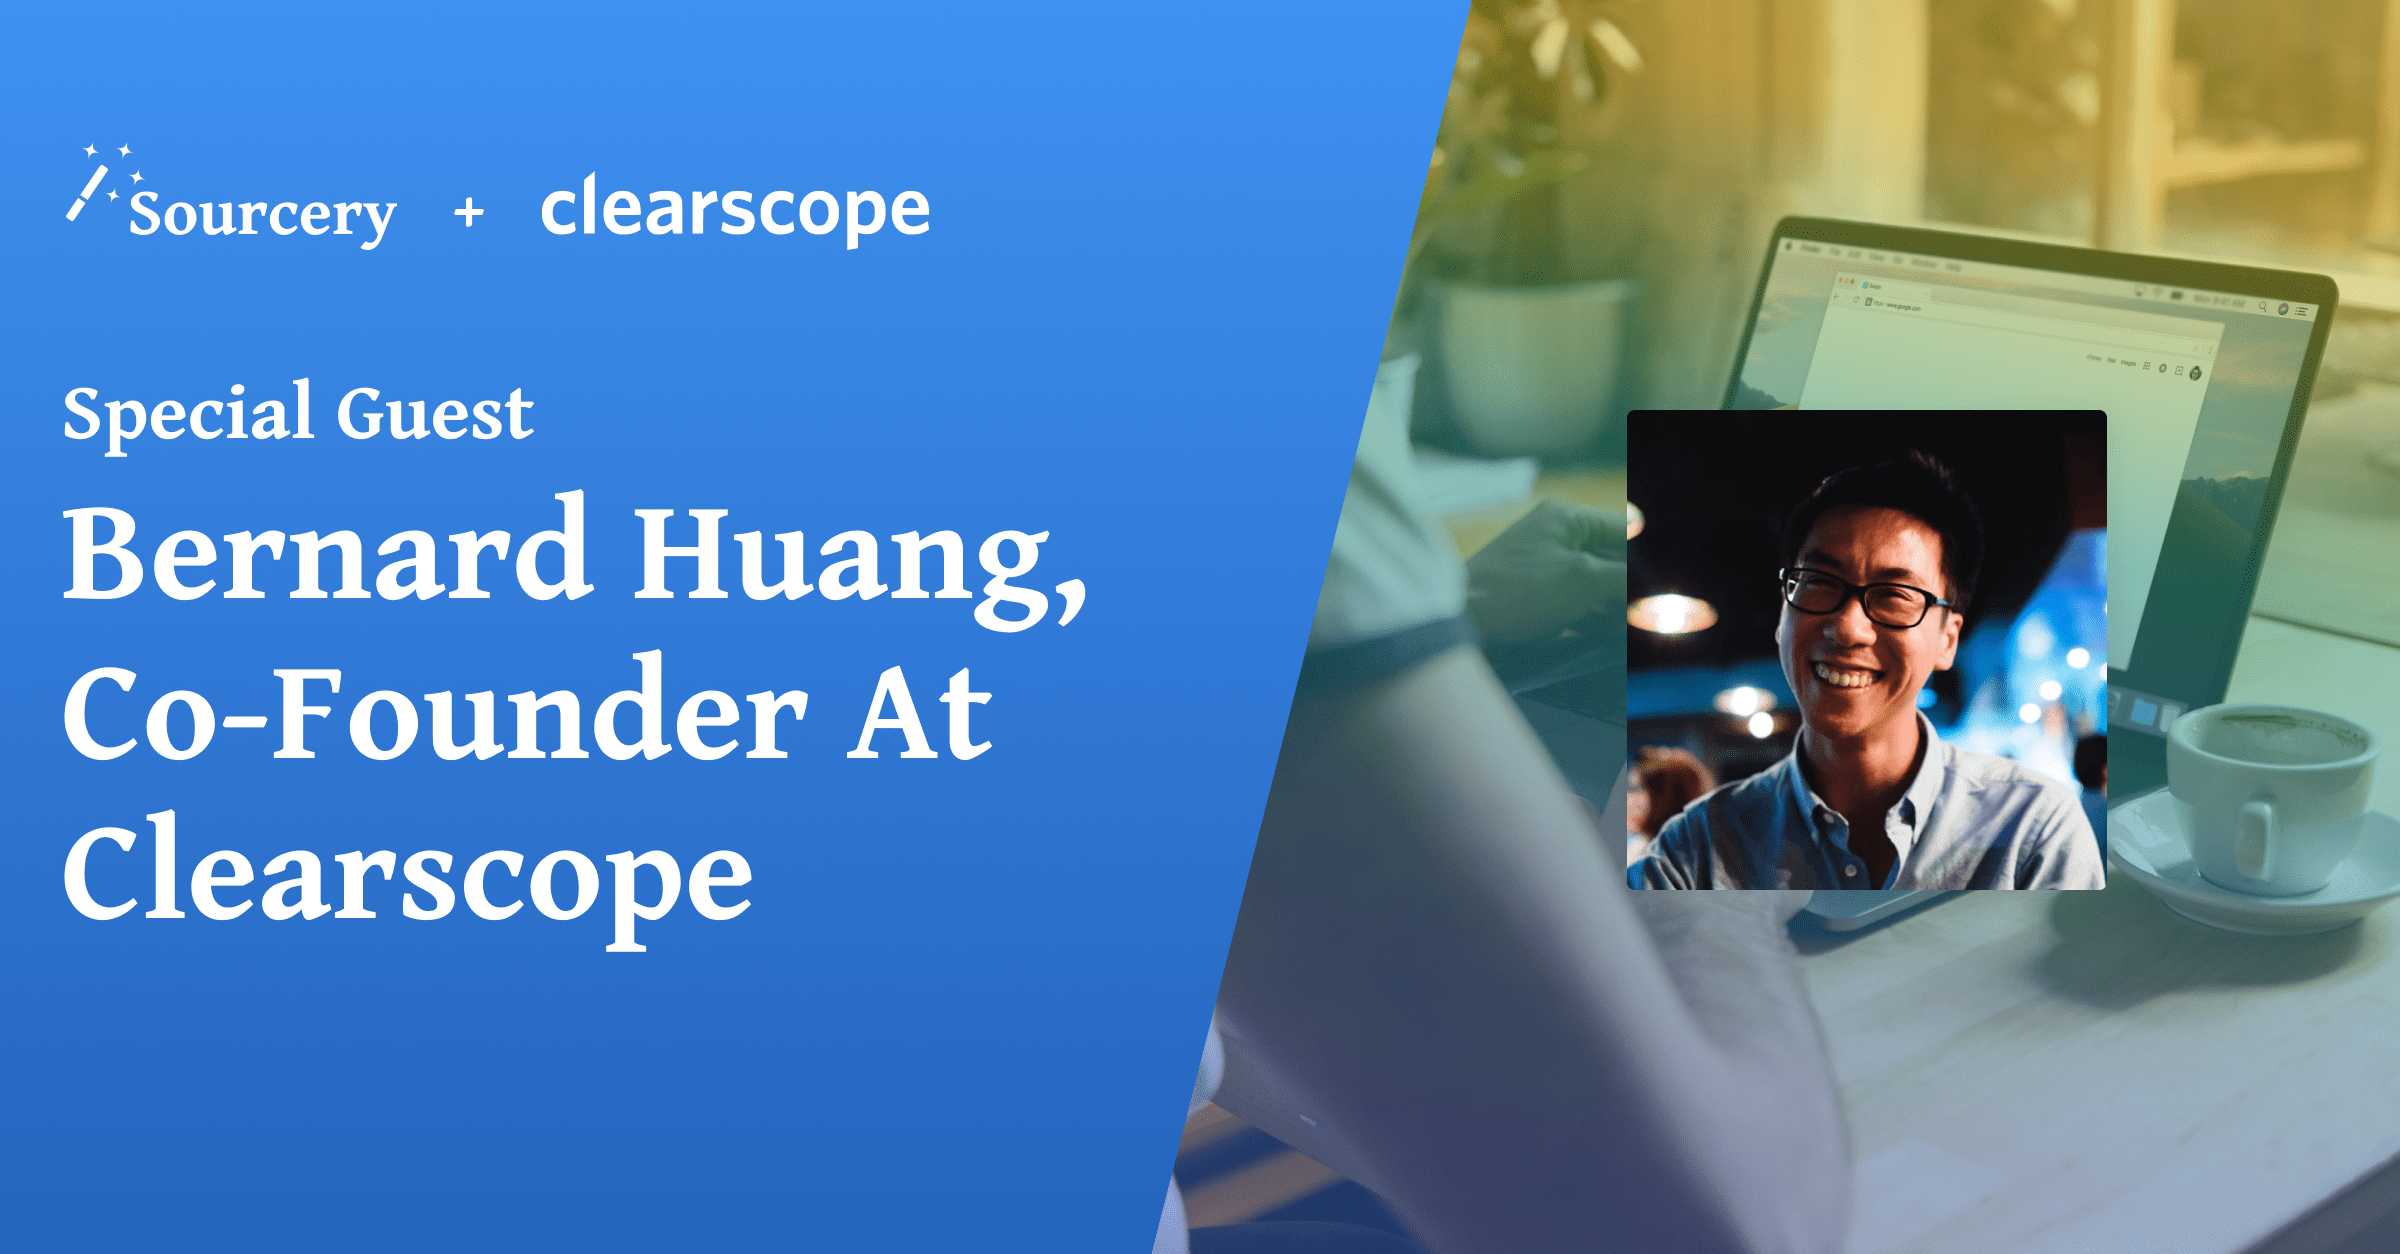 Bernard Huang from Clearscope